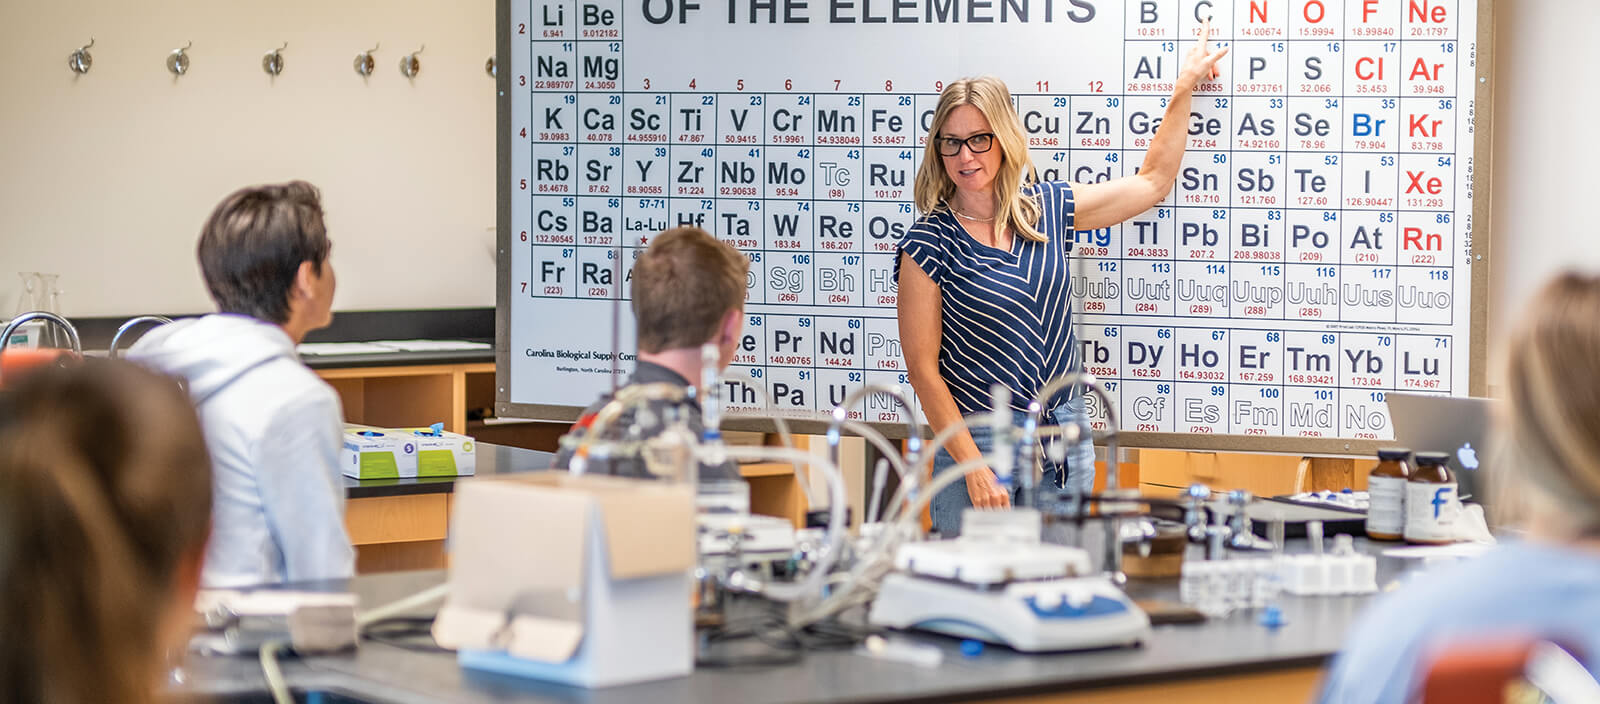 A professor gestures toward a periodic table in a chemistry class.